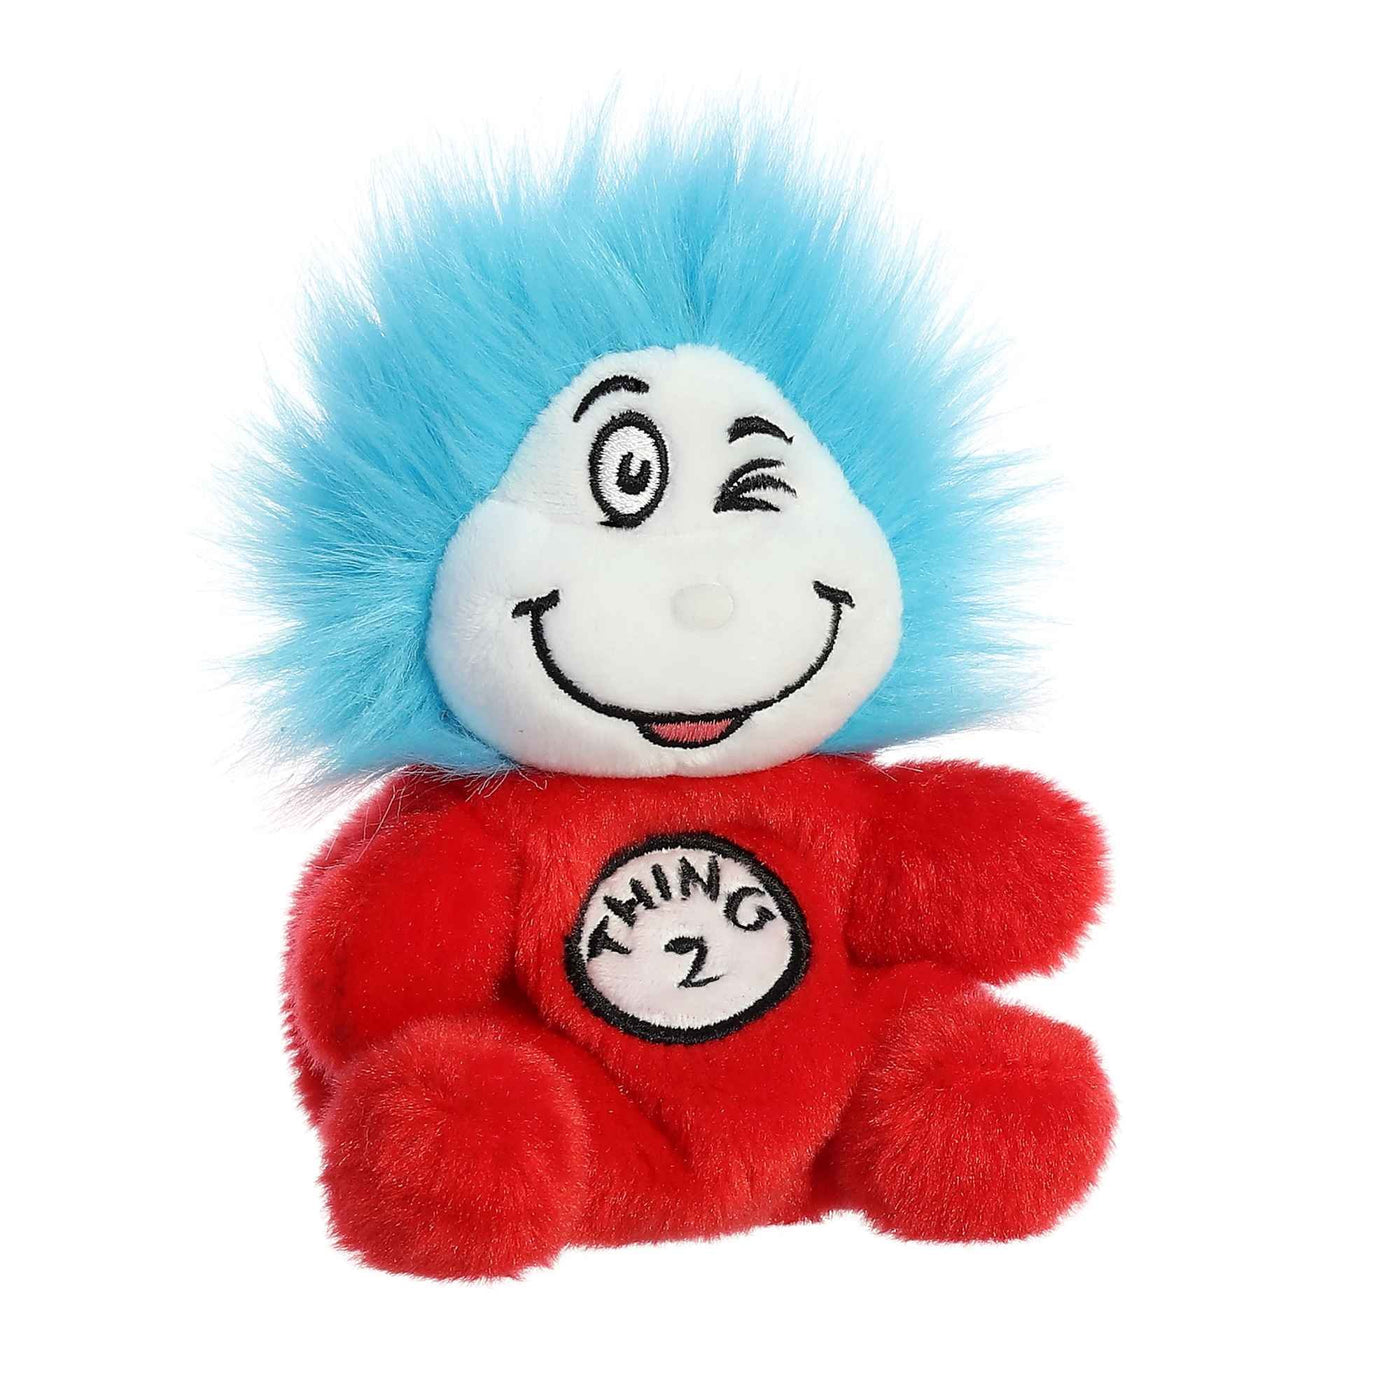 Aurora Dr. Seuss The Cat in the Hat 5" Thing 2 Palm Pals Plush Toy - Side View